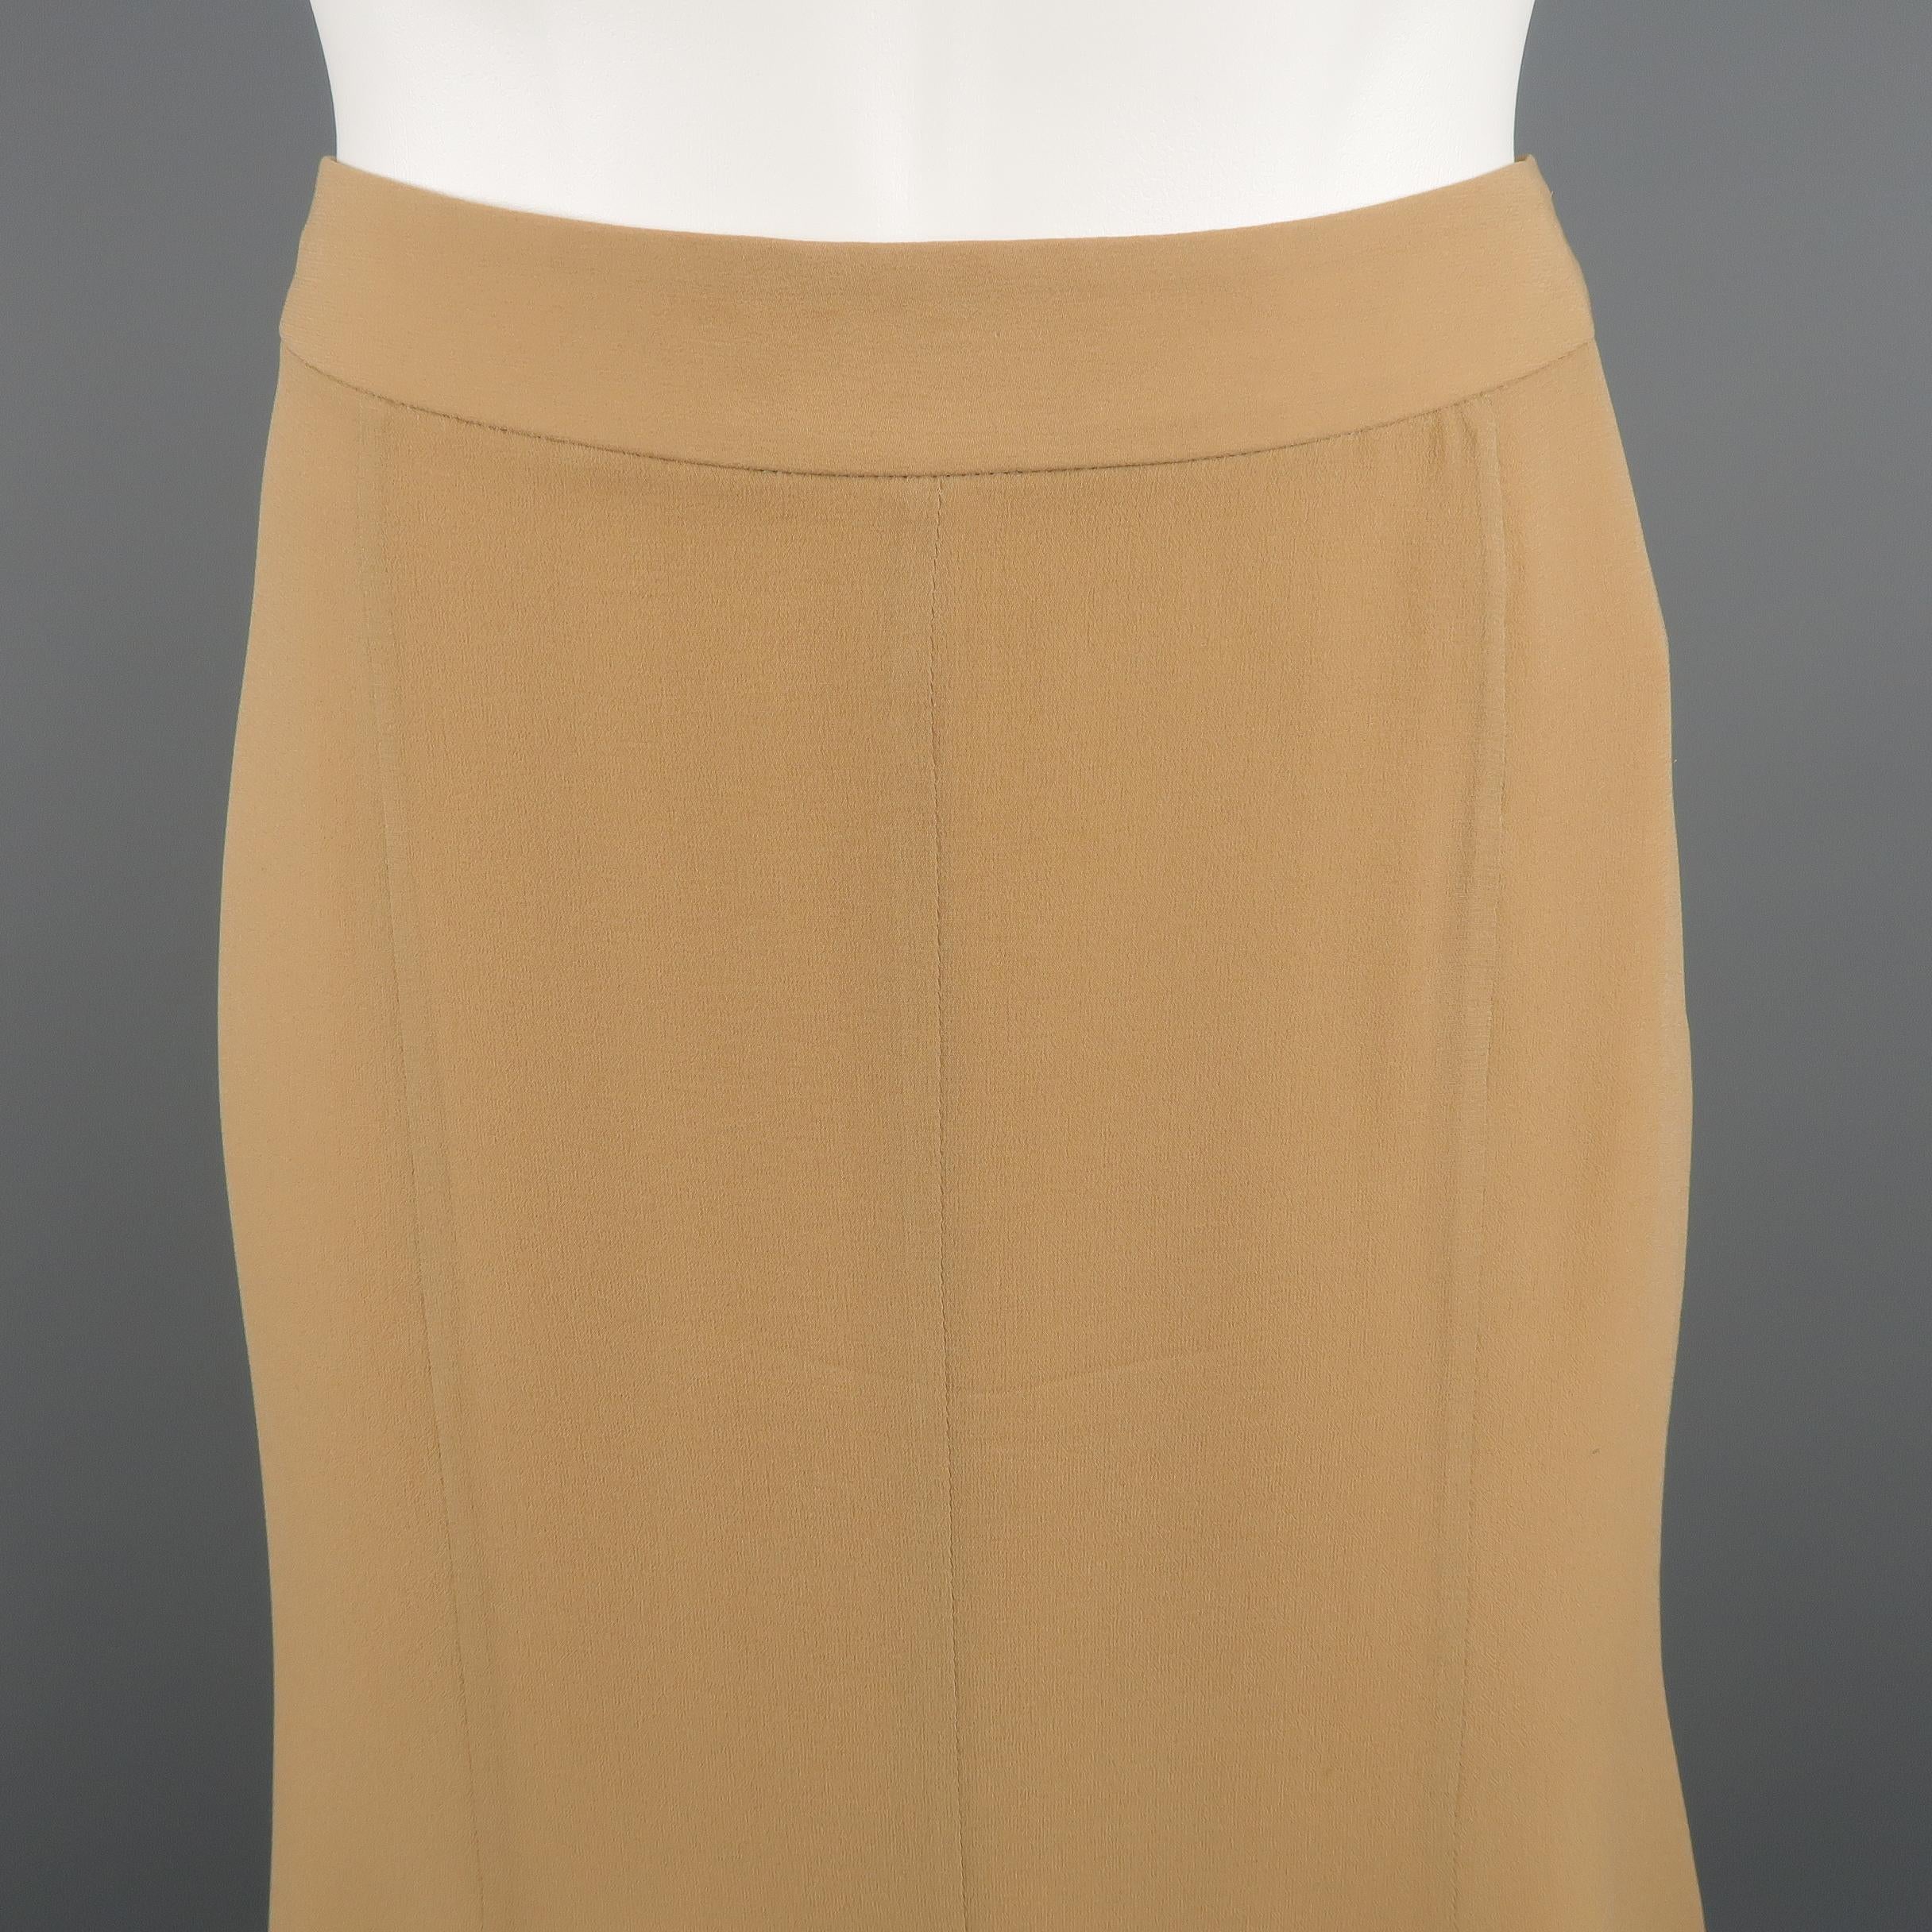 GIORGIO ARMANI classic tulip skirt, comes in a beige tone, silk crepe material and zipper closure. Made in Italy.
 
Excellent Pre-Owned Condition.
Marked: no size
 
Measurements:
 
Waist: 29 in.
Hip: 36 in.
Length: 24 in.